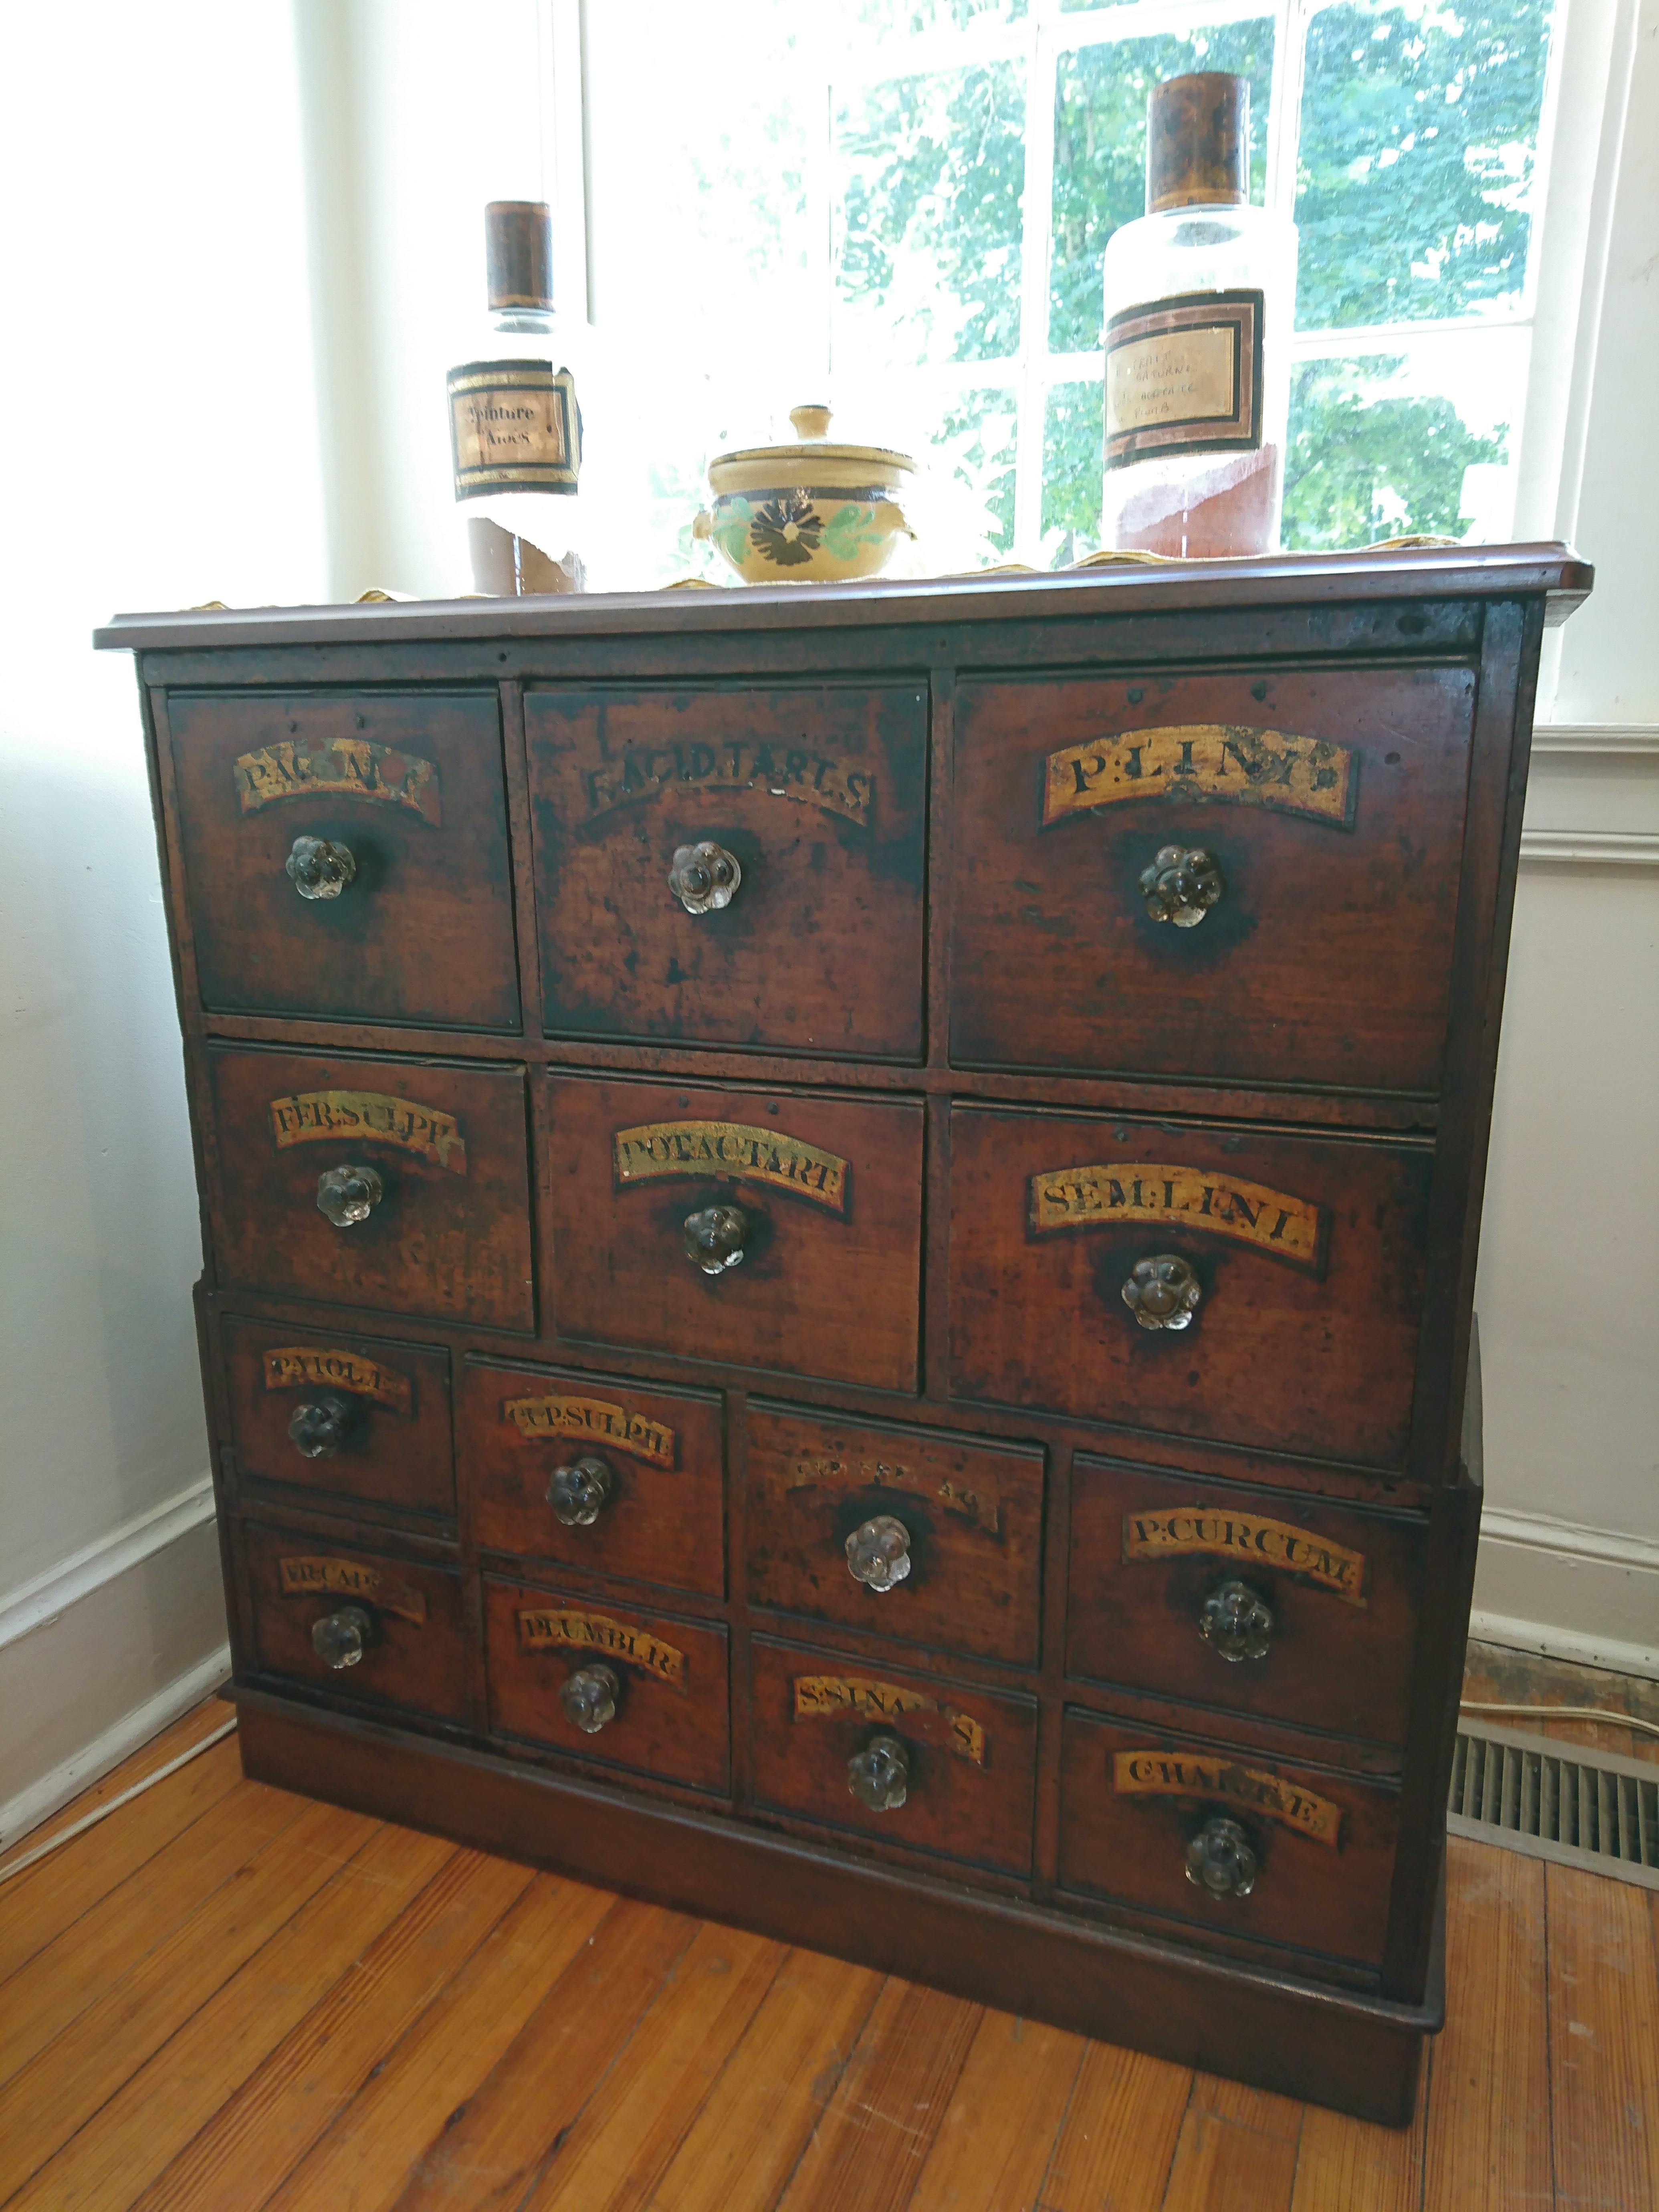 This English Apothecary dates from 1850 and is made of mahogany. Those who know our store are aware of our love of multi drawer pieces. This apothecary is the gold standard: it’s got both original labels and original glass knobs. If a piece could be